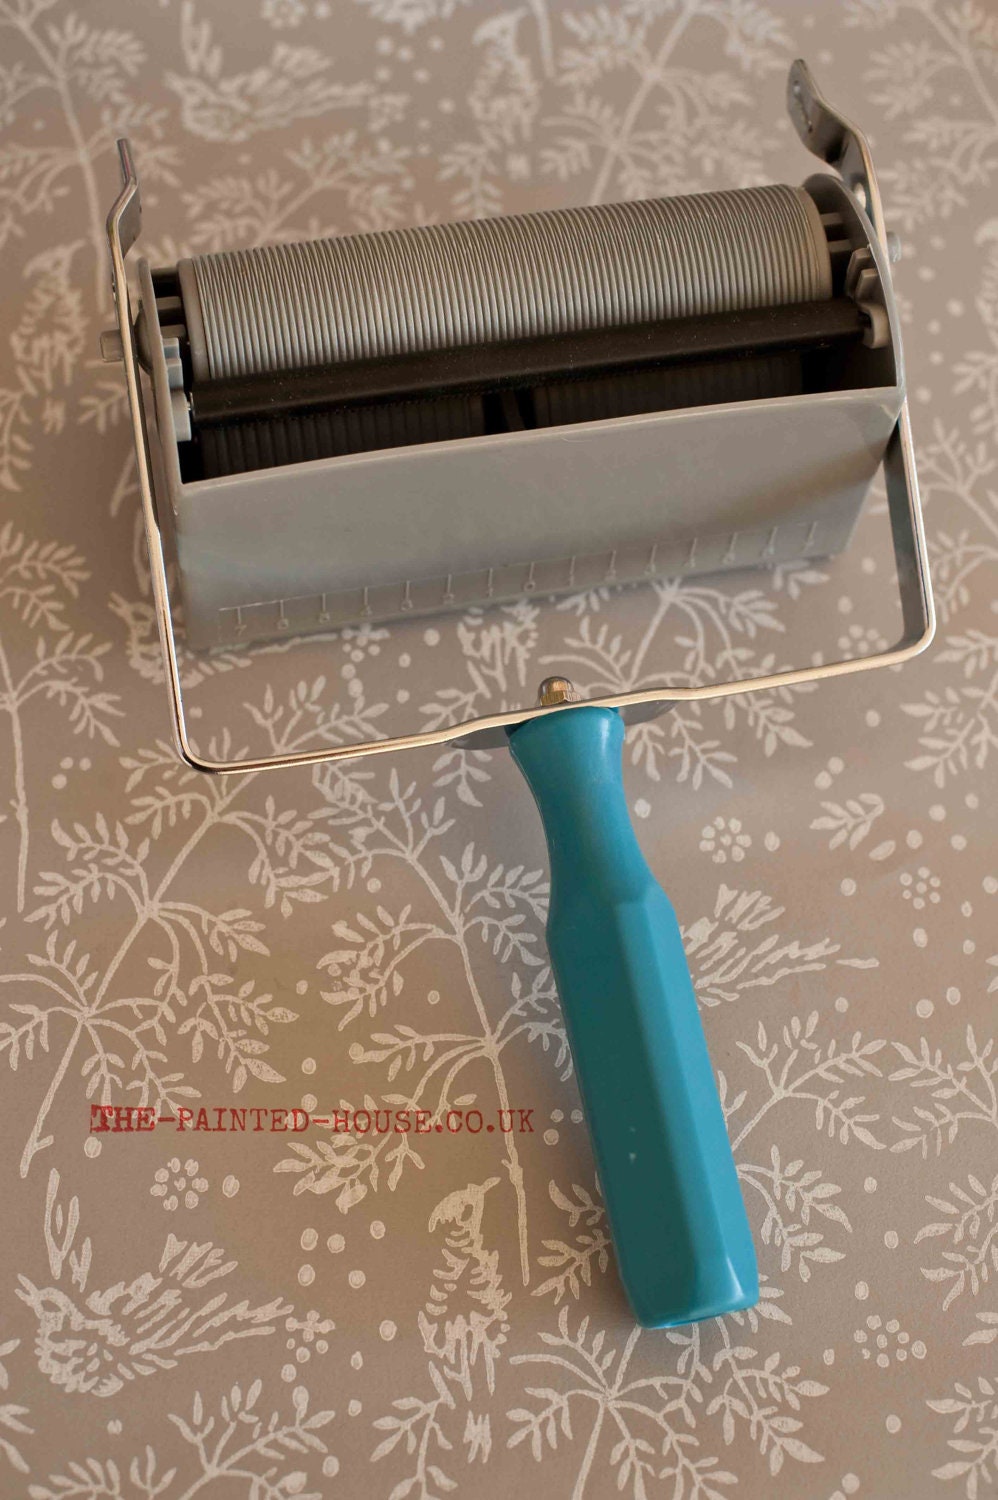 Fabric Applicator from The Painted House to use with our patterned paint rollers